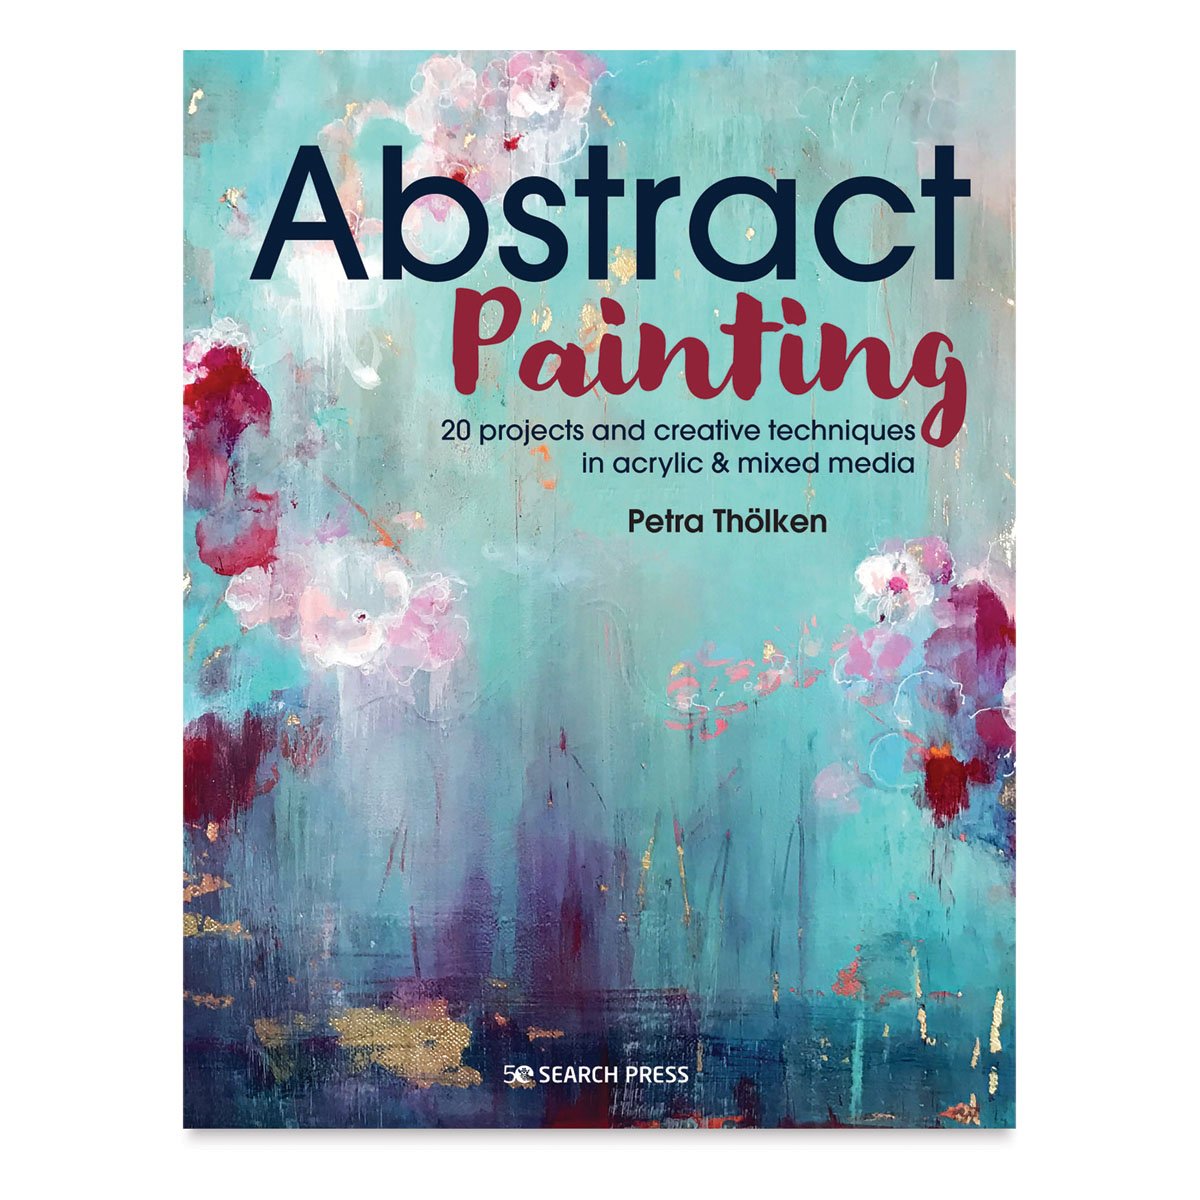 Abstract Painting: 20 Projects and Creative Techniques in Acrylic & Mixed Media [Book]